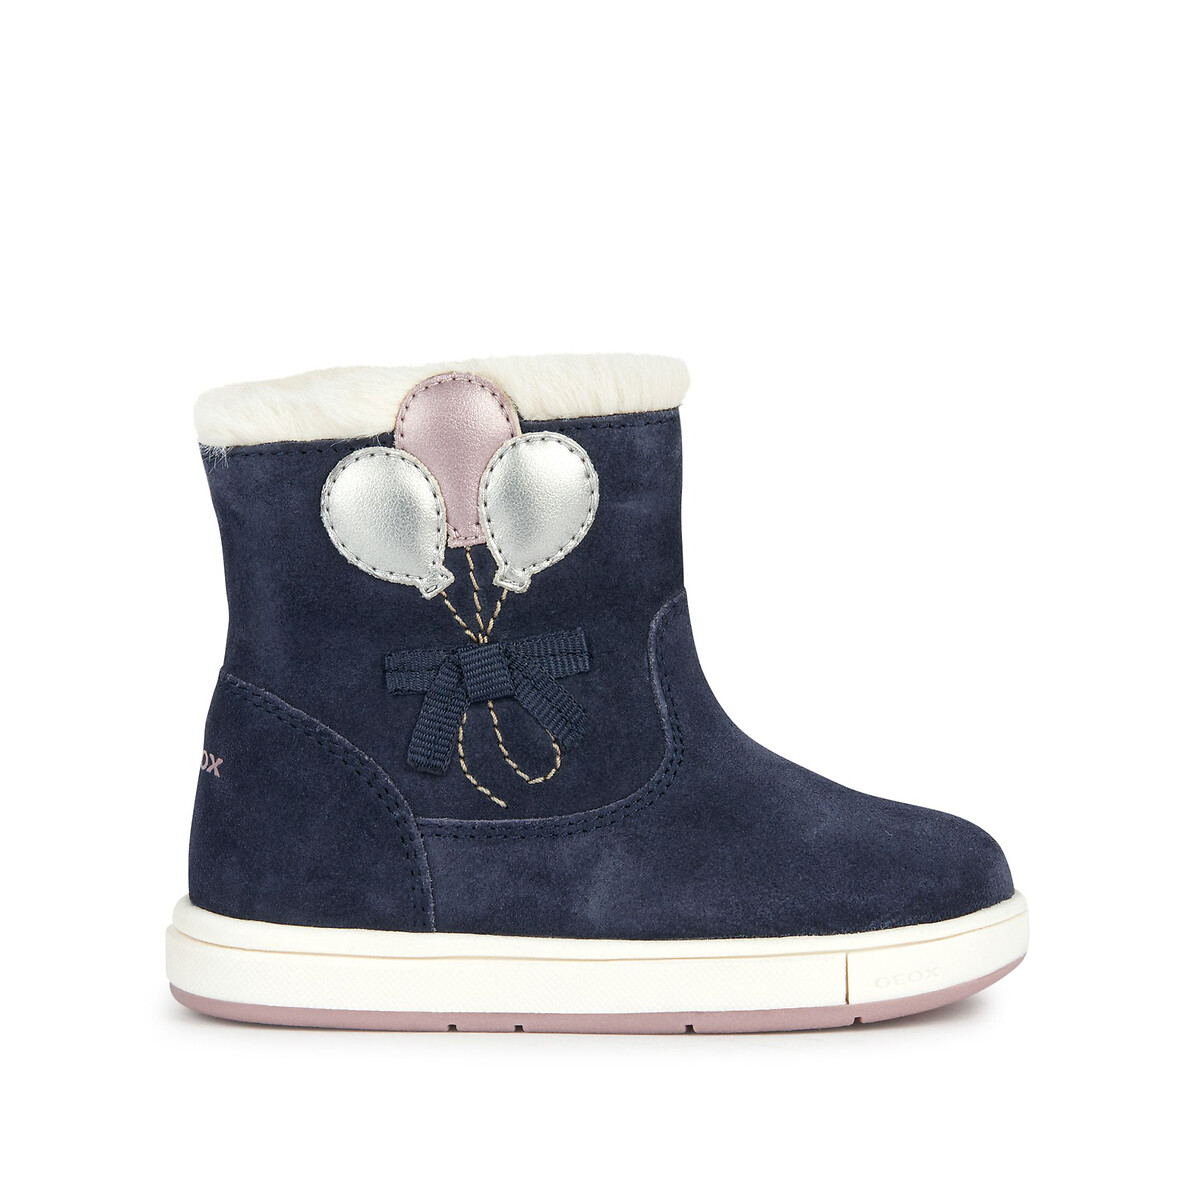 Image of Kids Trottola Suede Calf Boots with Faux Fur